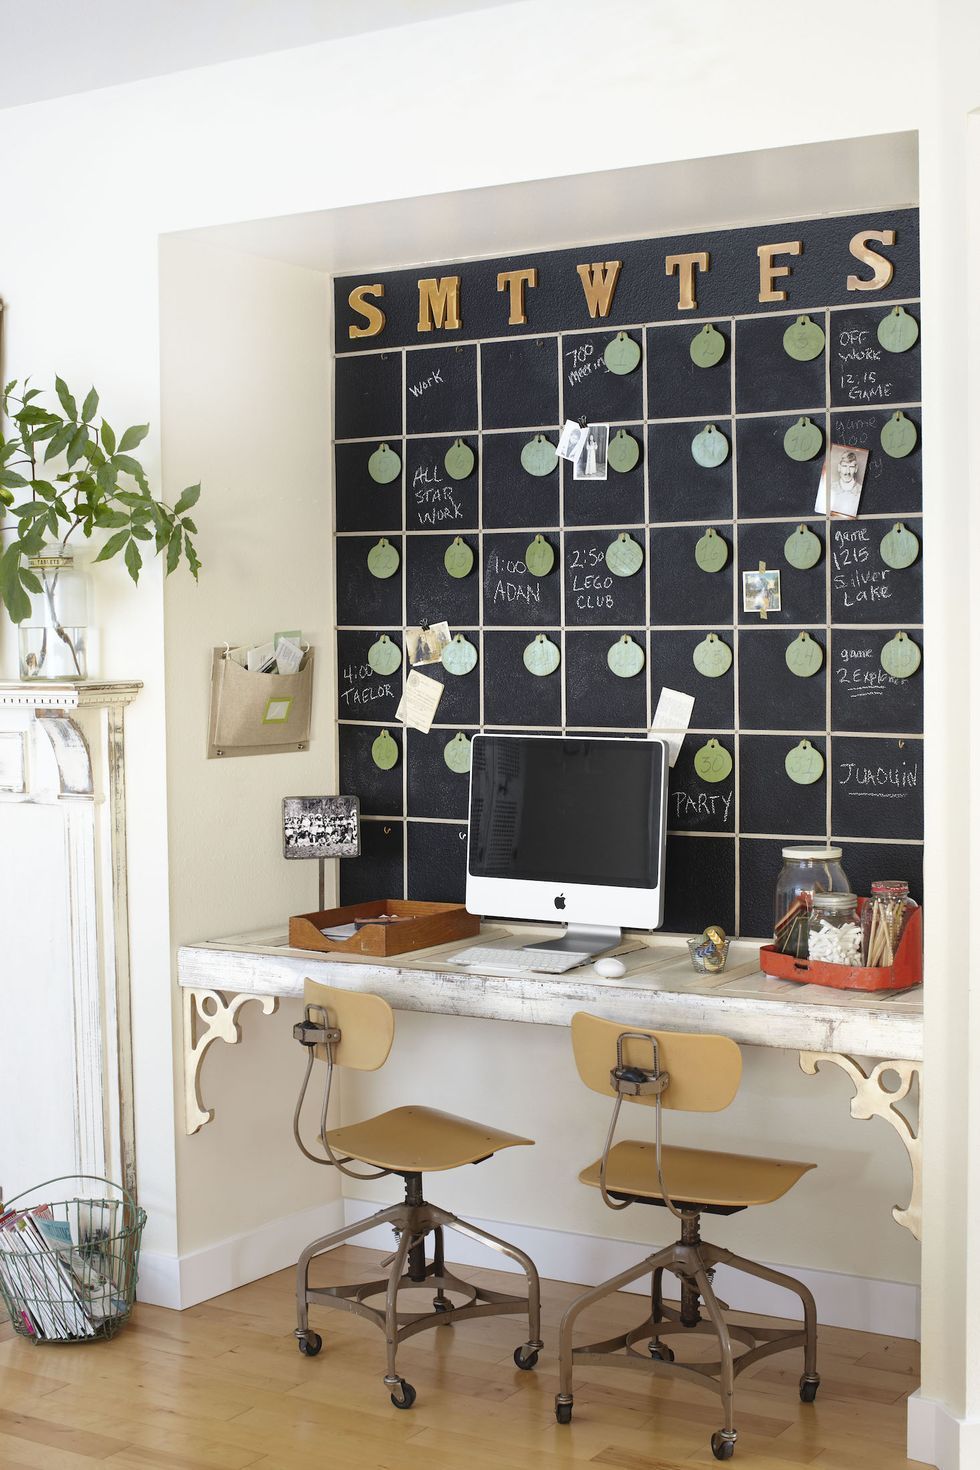 6 Office Decor Ideas To Inspire Your Team